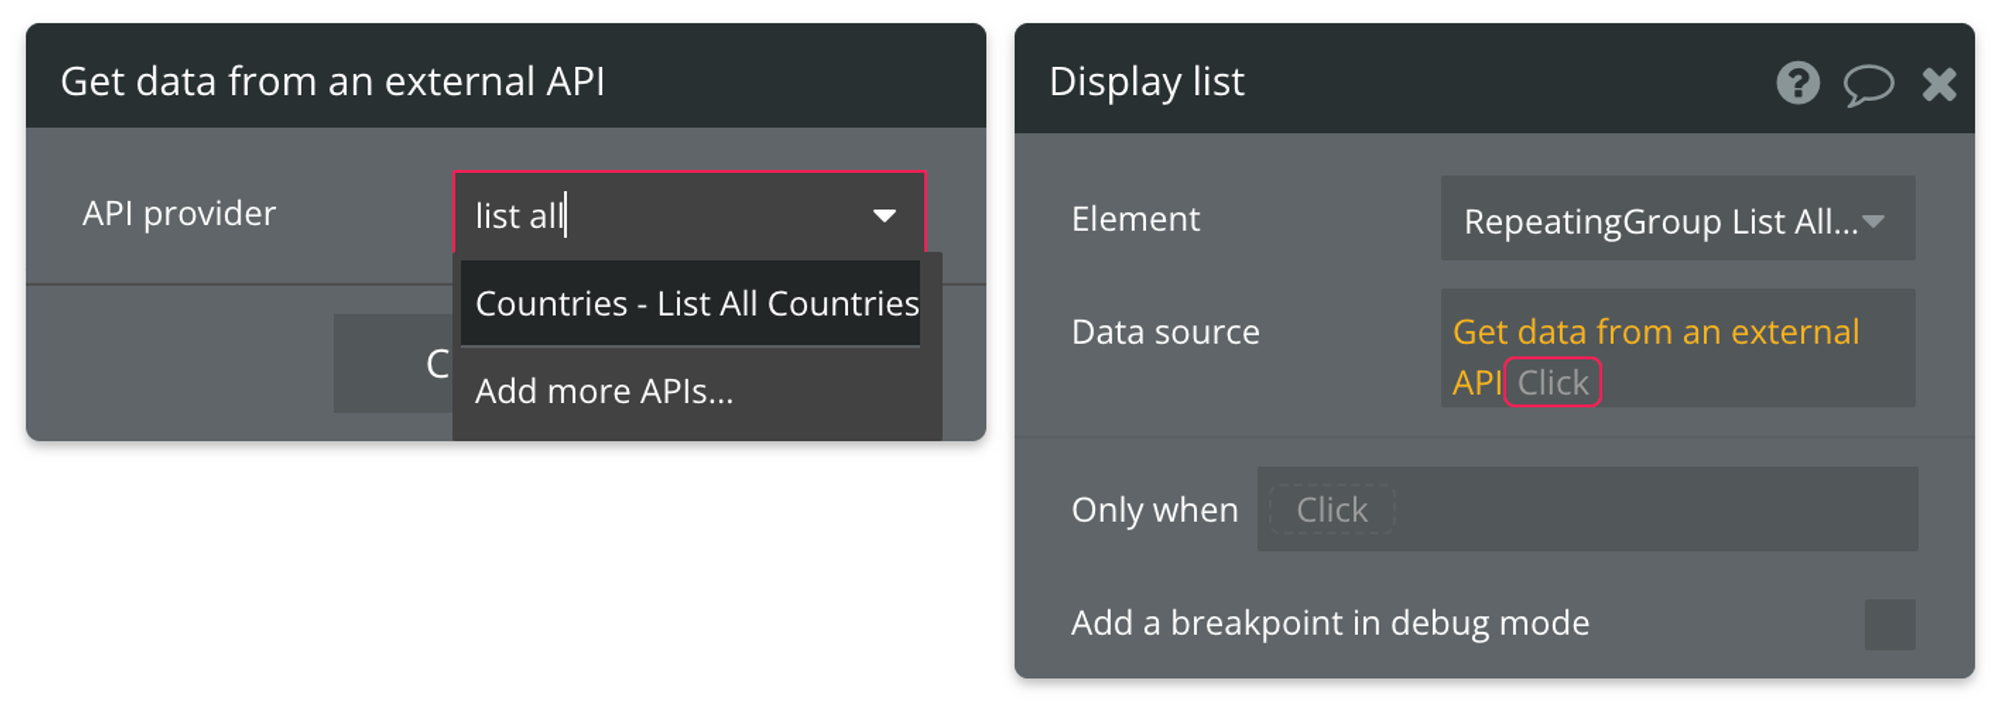 Select "Get data from external API" from the list of data sources, then find Countries - List All Countries from the list of API providers